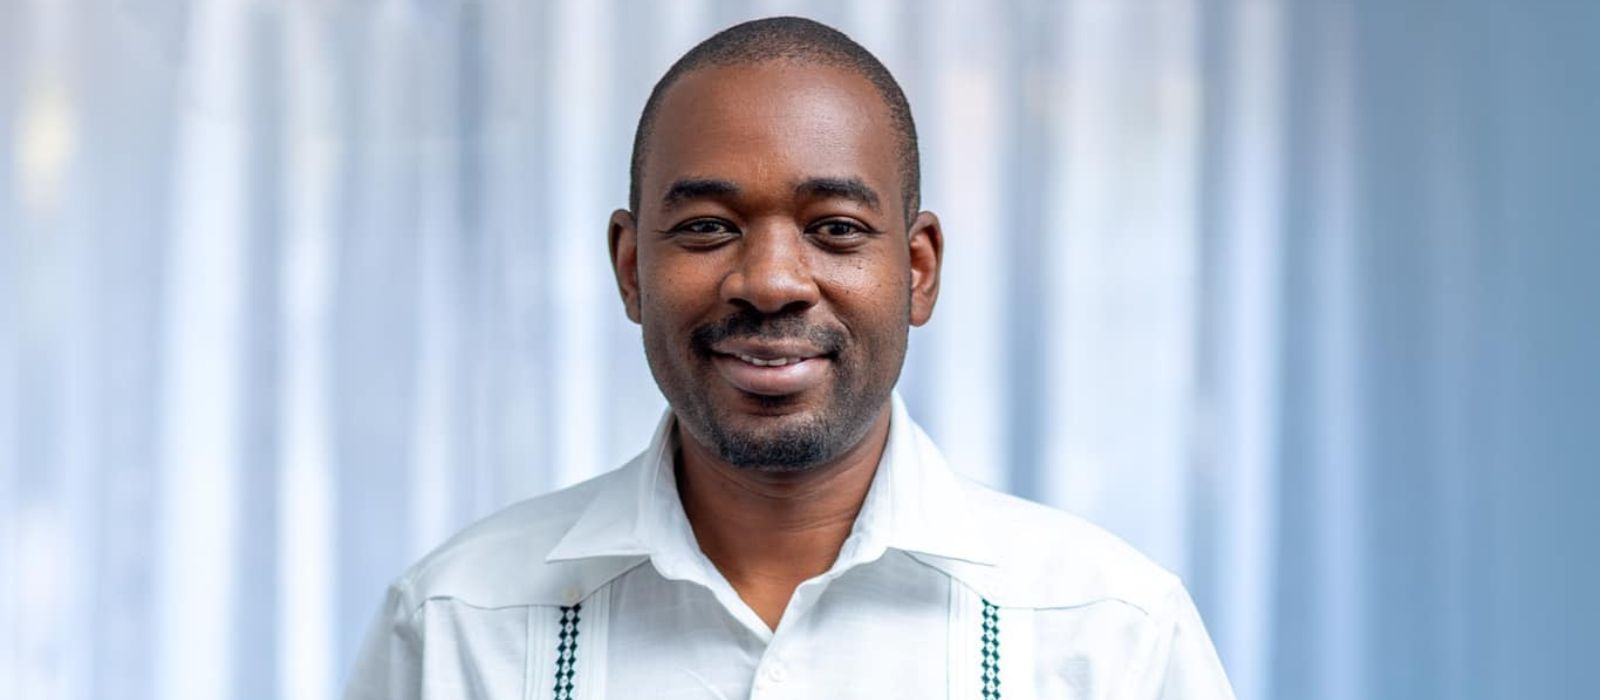 The main opposition party’s leader, Chamisa, has relinquished his role